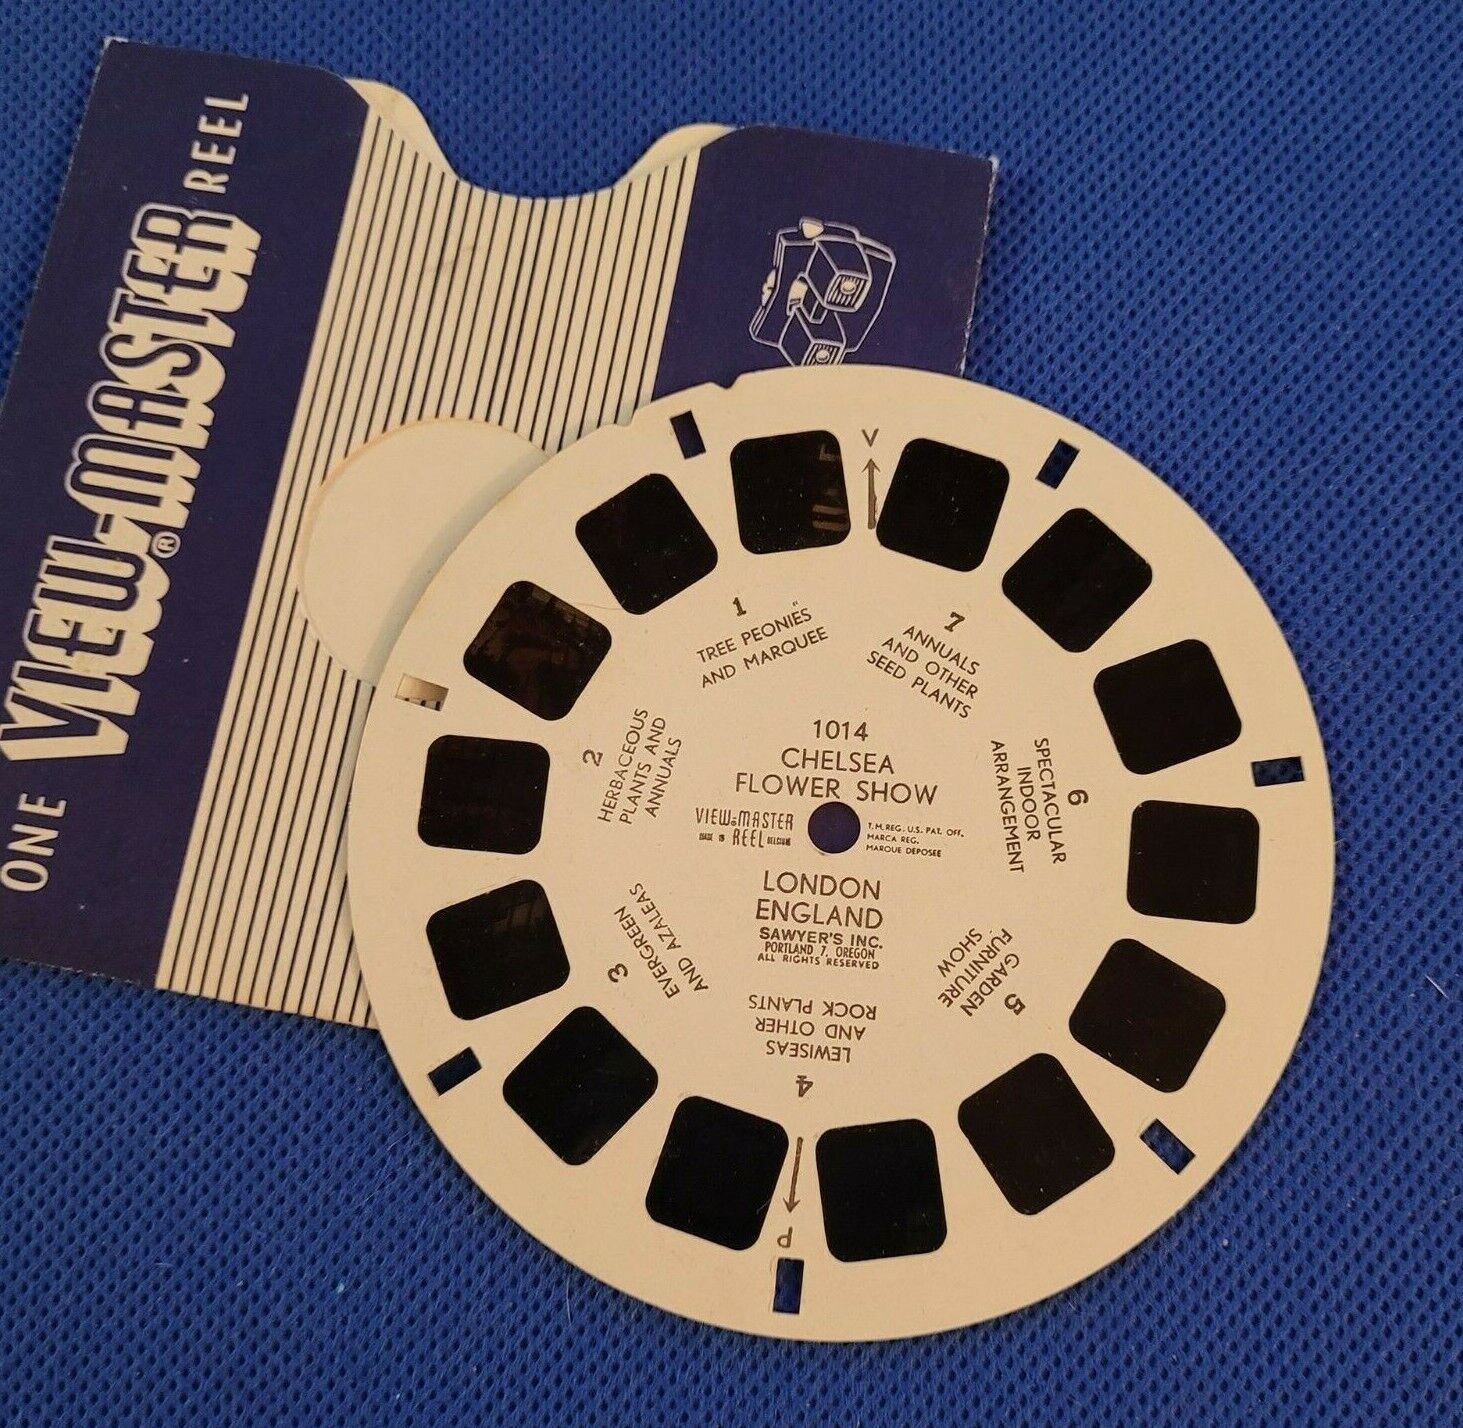 Sawyer\'s Vintage view-master Reel 1014 Chelsea Flower Show London England